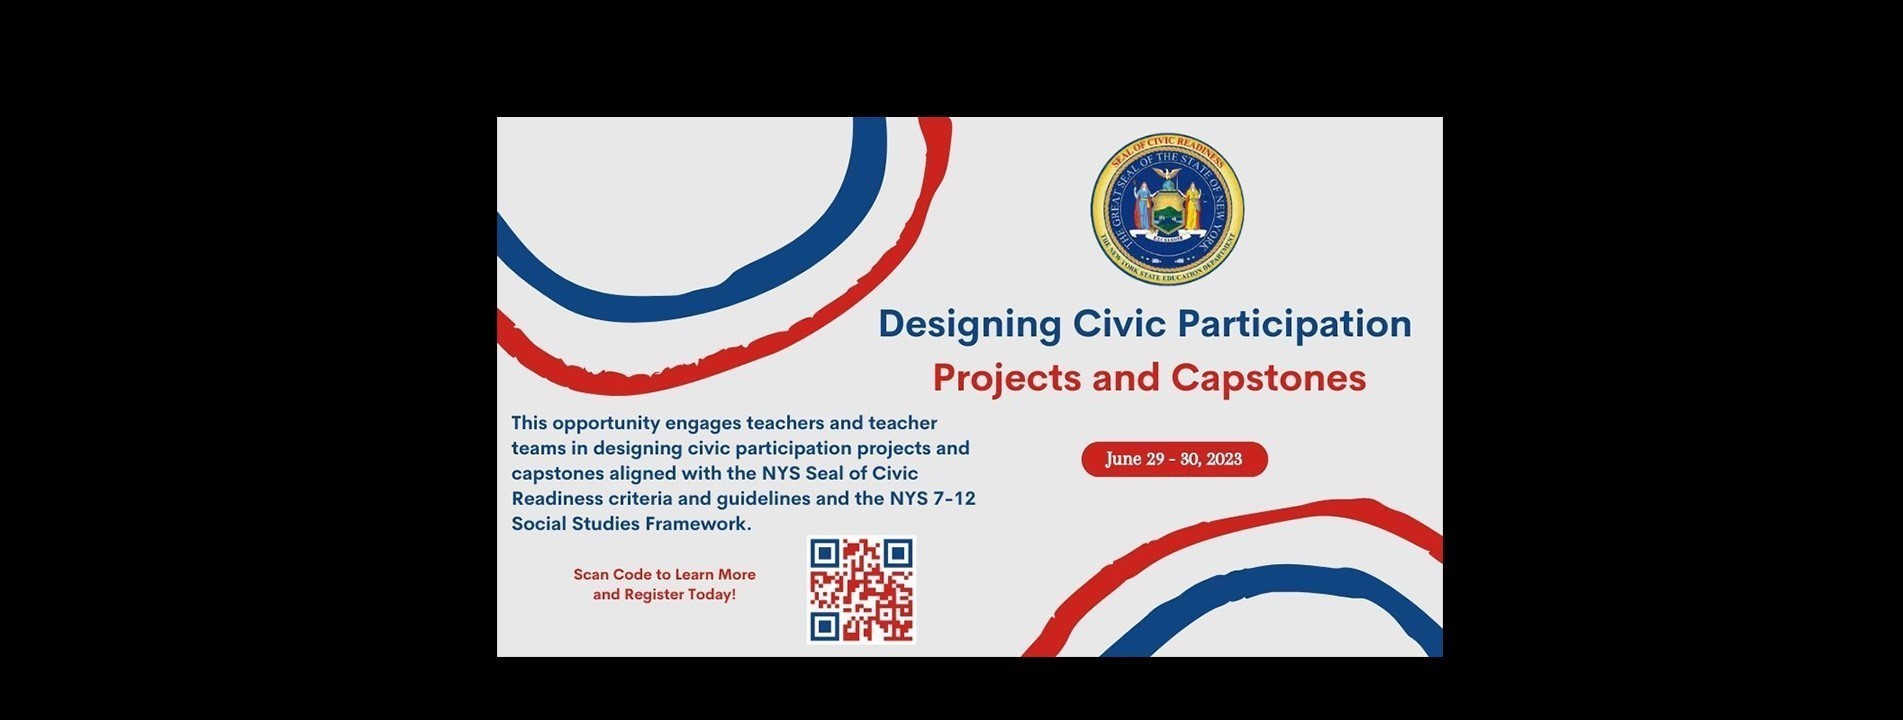 Designing Civic Participation Projects and Capstones, June 29 - 30, 2023. Overview: This opportunity engages teachers and teacher teams in designing civic participation projects and capstones aligned with the NYS Seal of Civic Readiness criteria and guidelines and the NYS 7-12 Social Studies Framework.